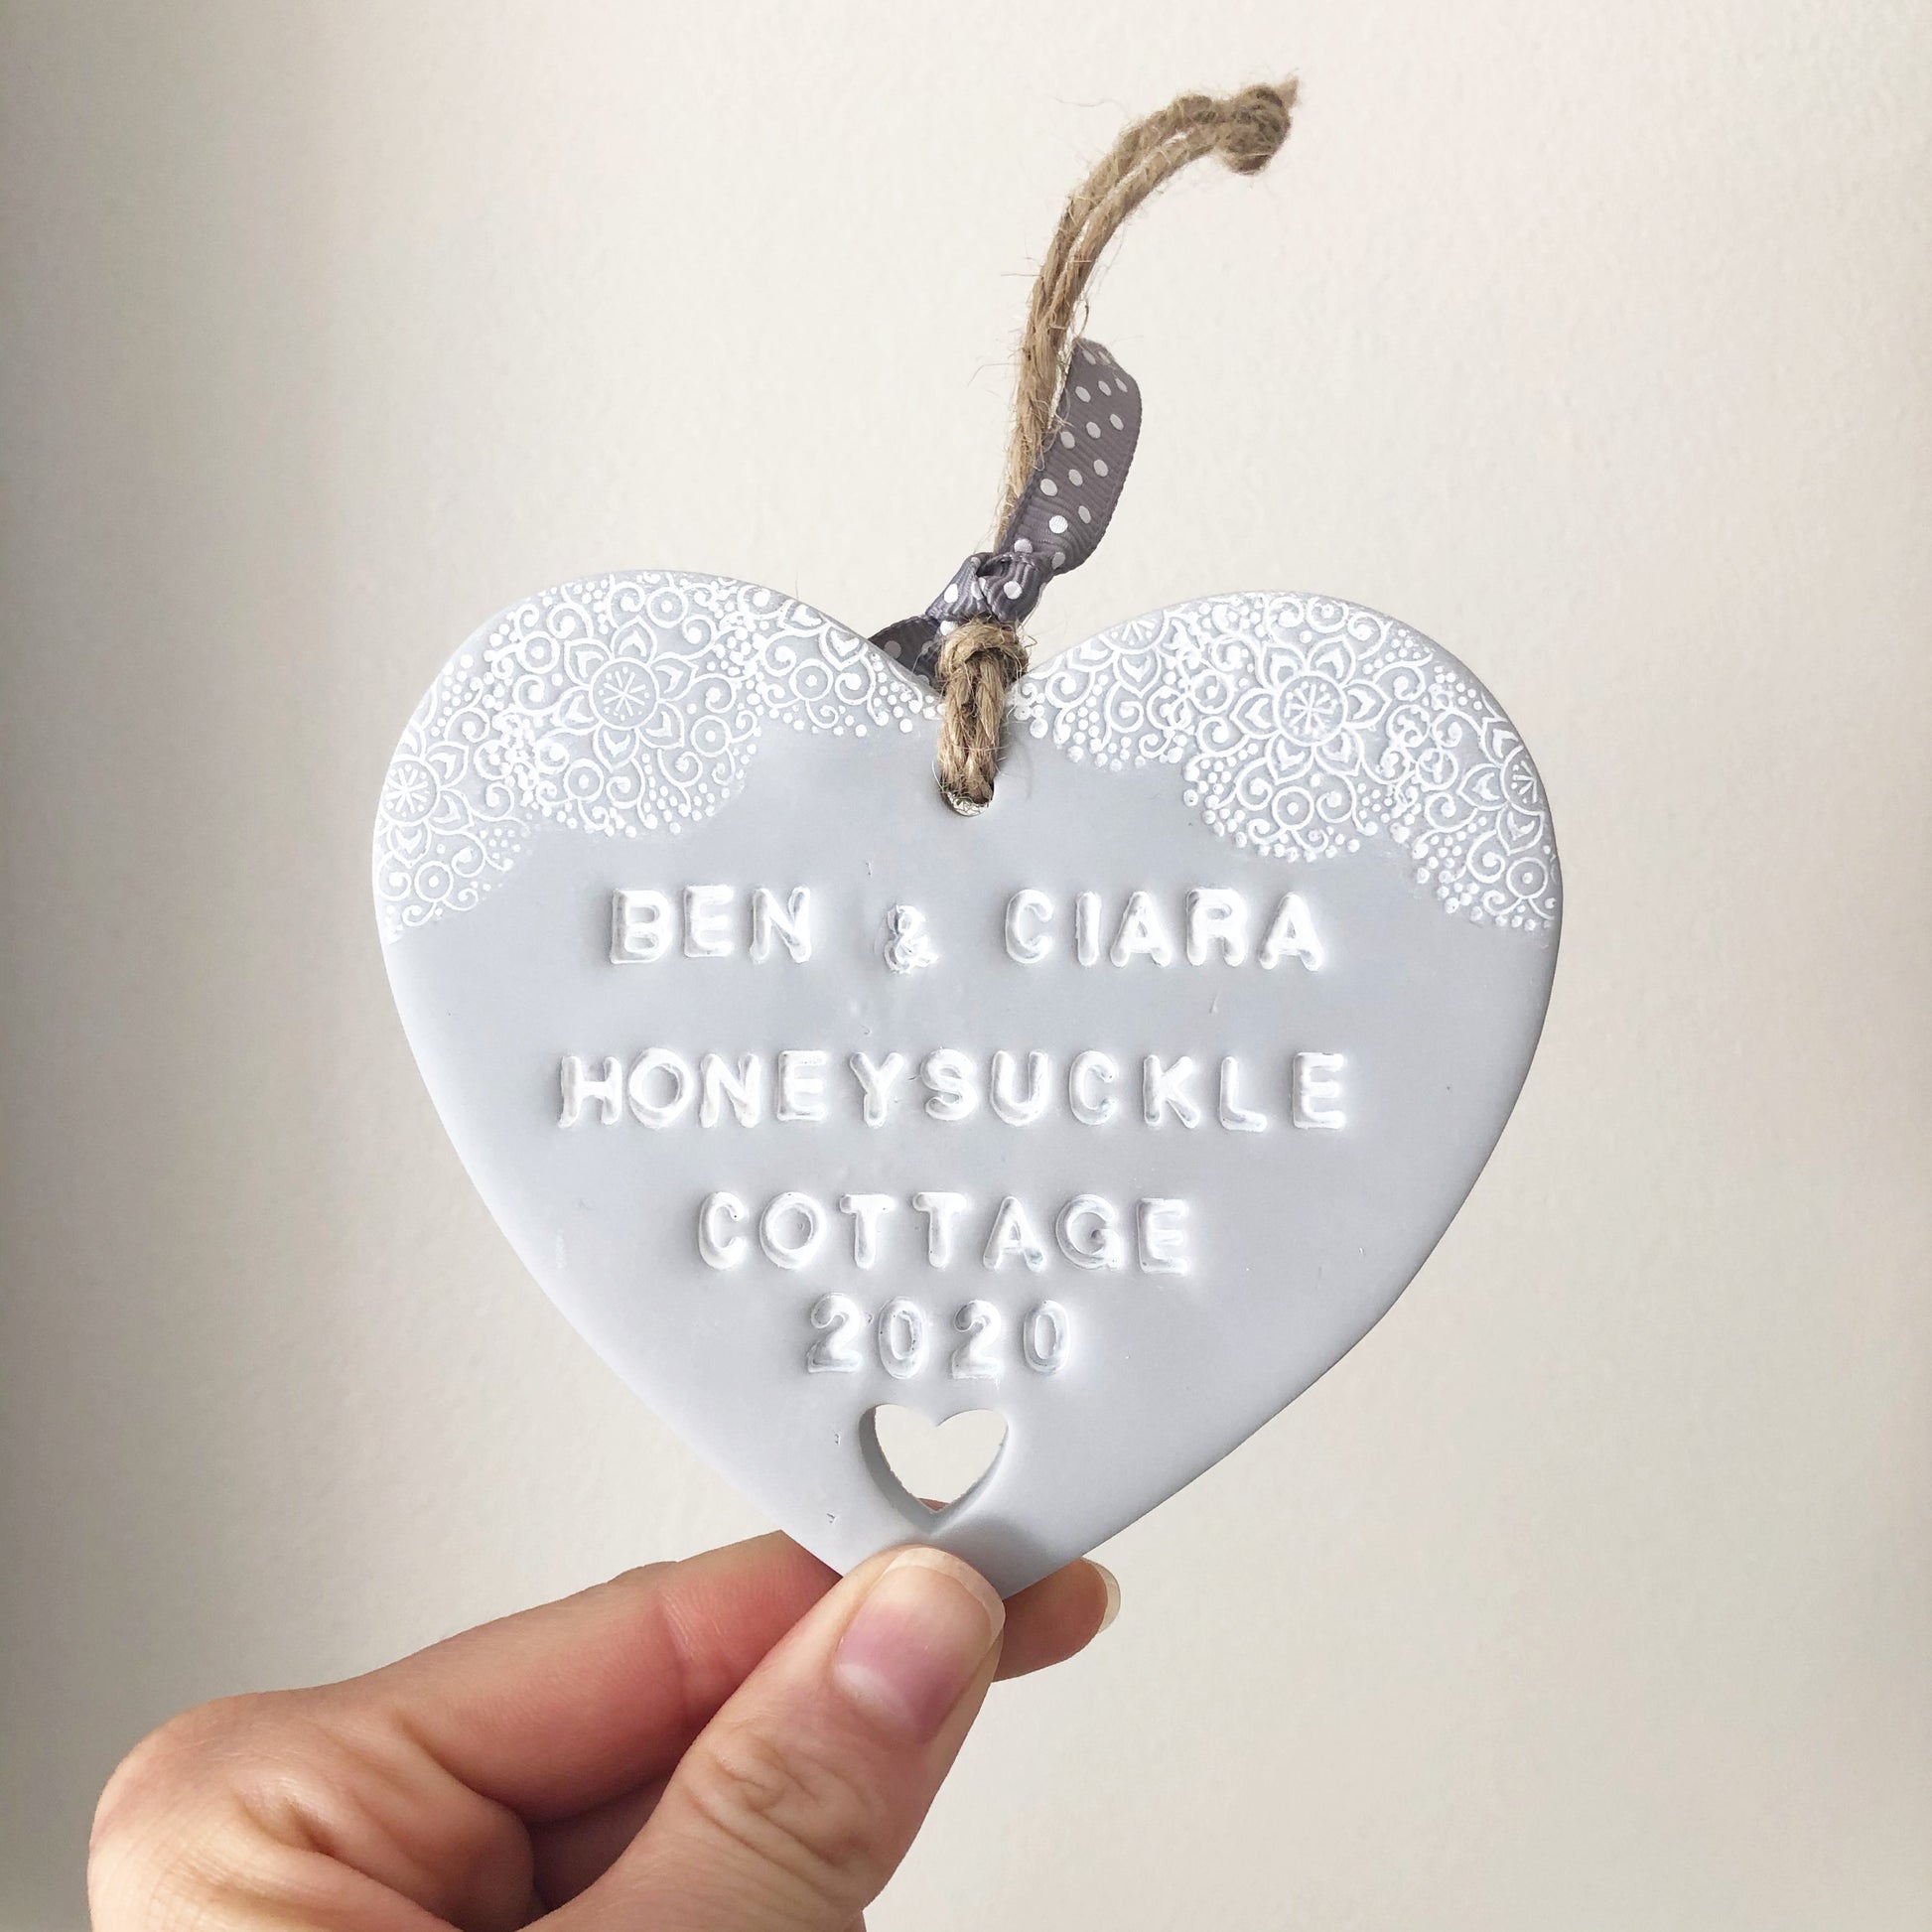 Personalised housewarming new home gift, grey clay heart with a white lace edge at the top of the heart and a heart cut out at the bottom with jute twine for hanging, the heart is personalised with BEN & CIARA HONEY SUCKLE COTTAGE 2020